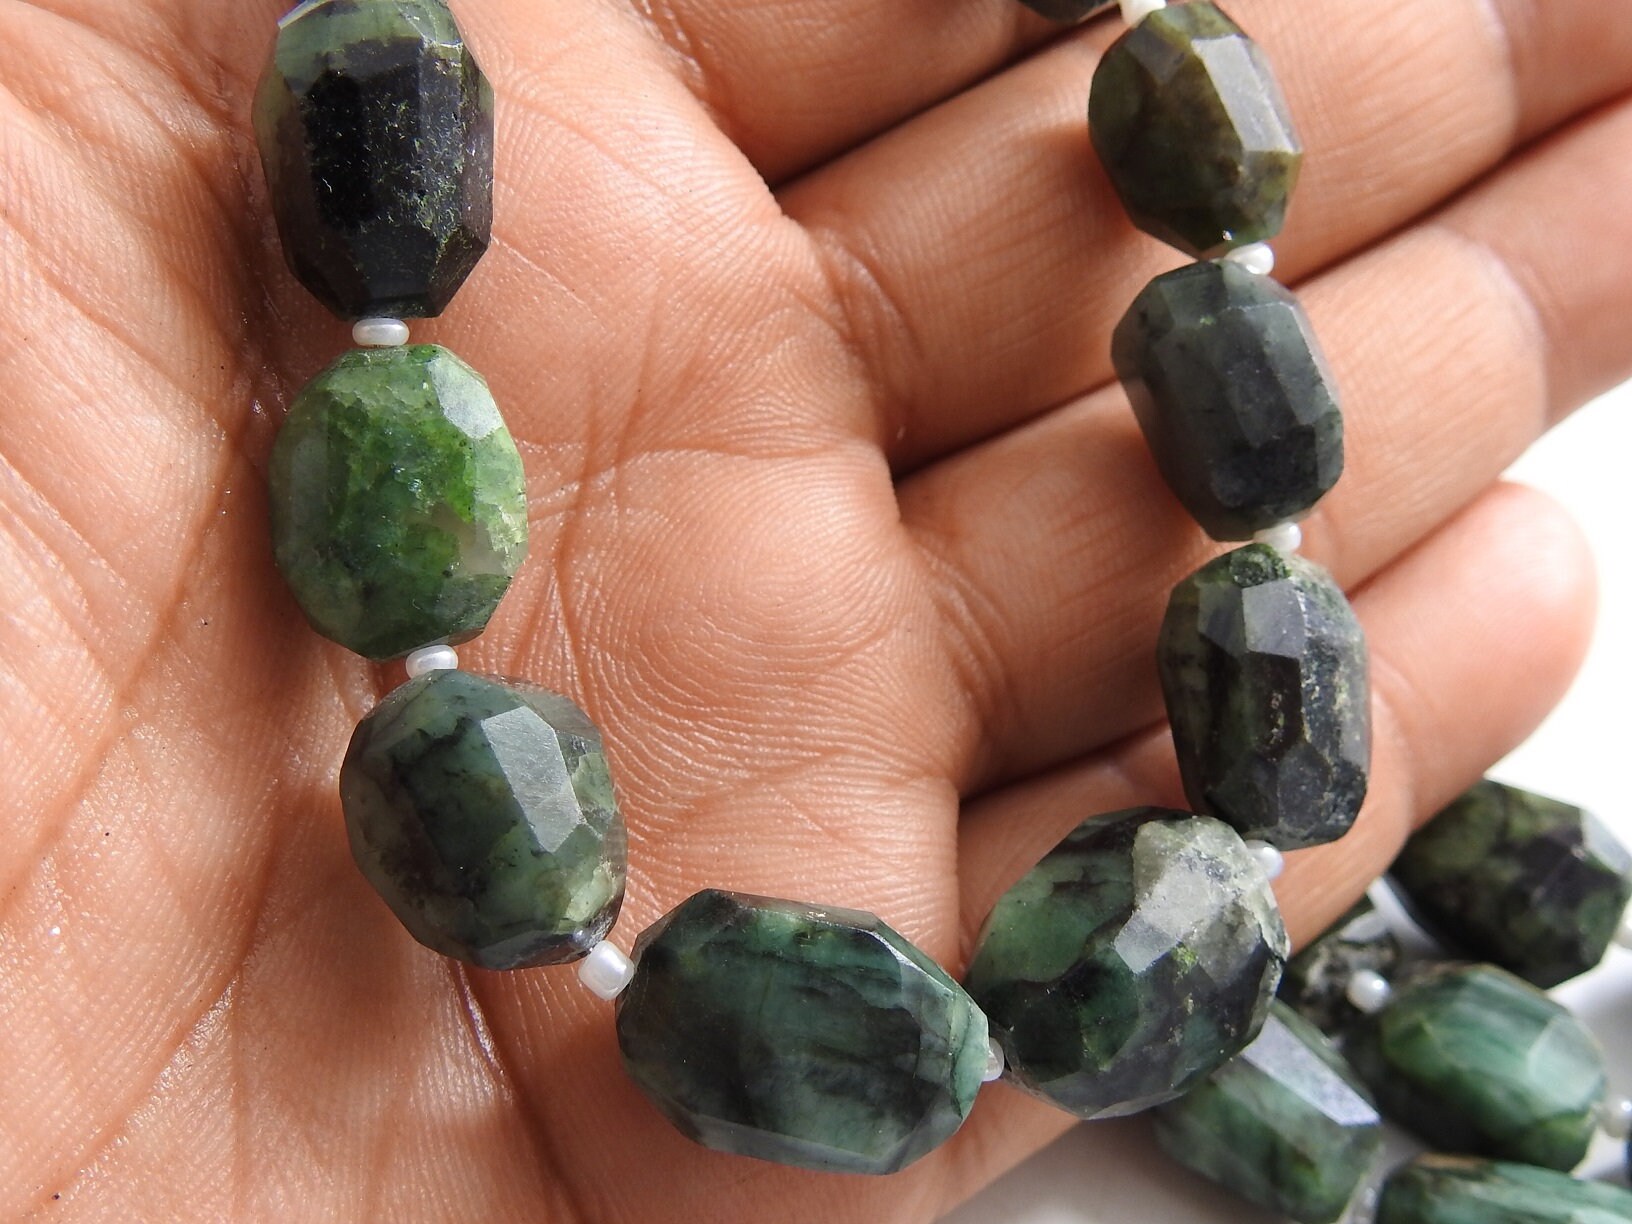 100%Natural,Emerald Faceted Tumble,Nugget,Irregular Shape Bead,Loose Stone,Handmade 12Inch 18X12To10XMM Approx Wholesaler,Supplies (pme)TU1 | Save 33% - Rajasthan Living 13